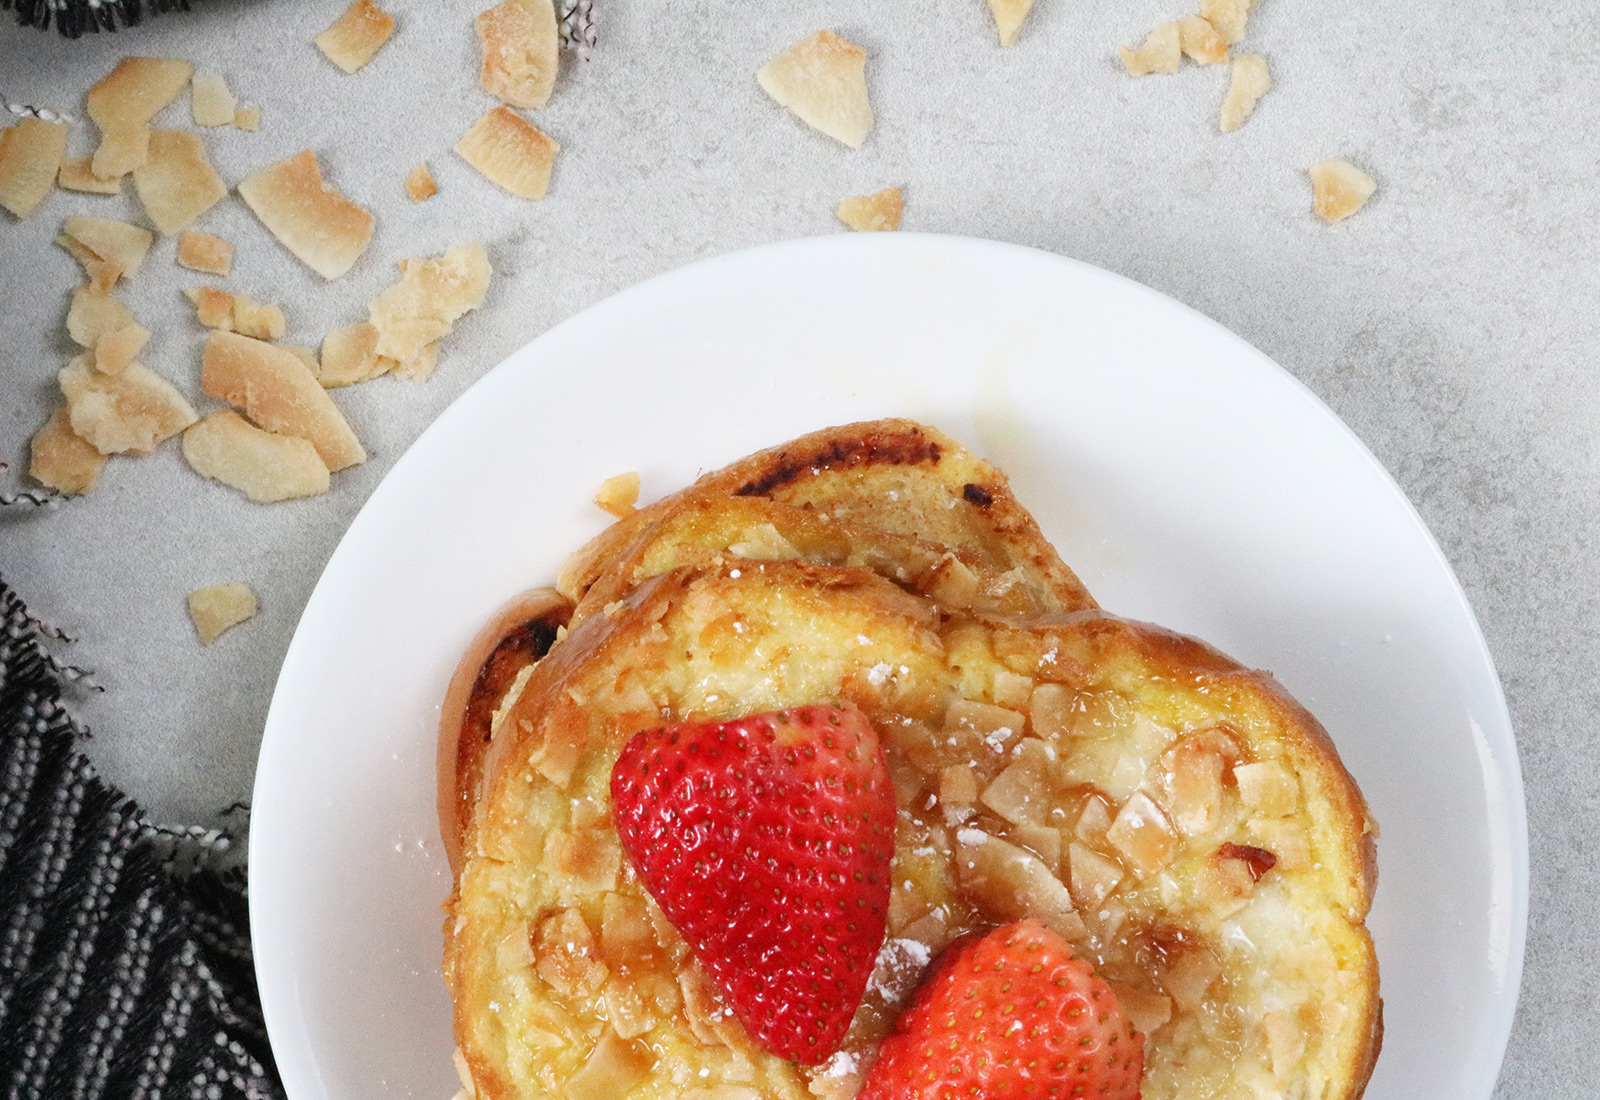 Coconut-Crusted French Toast Recipe